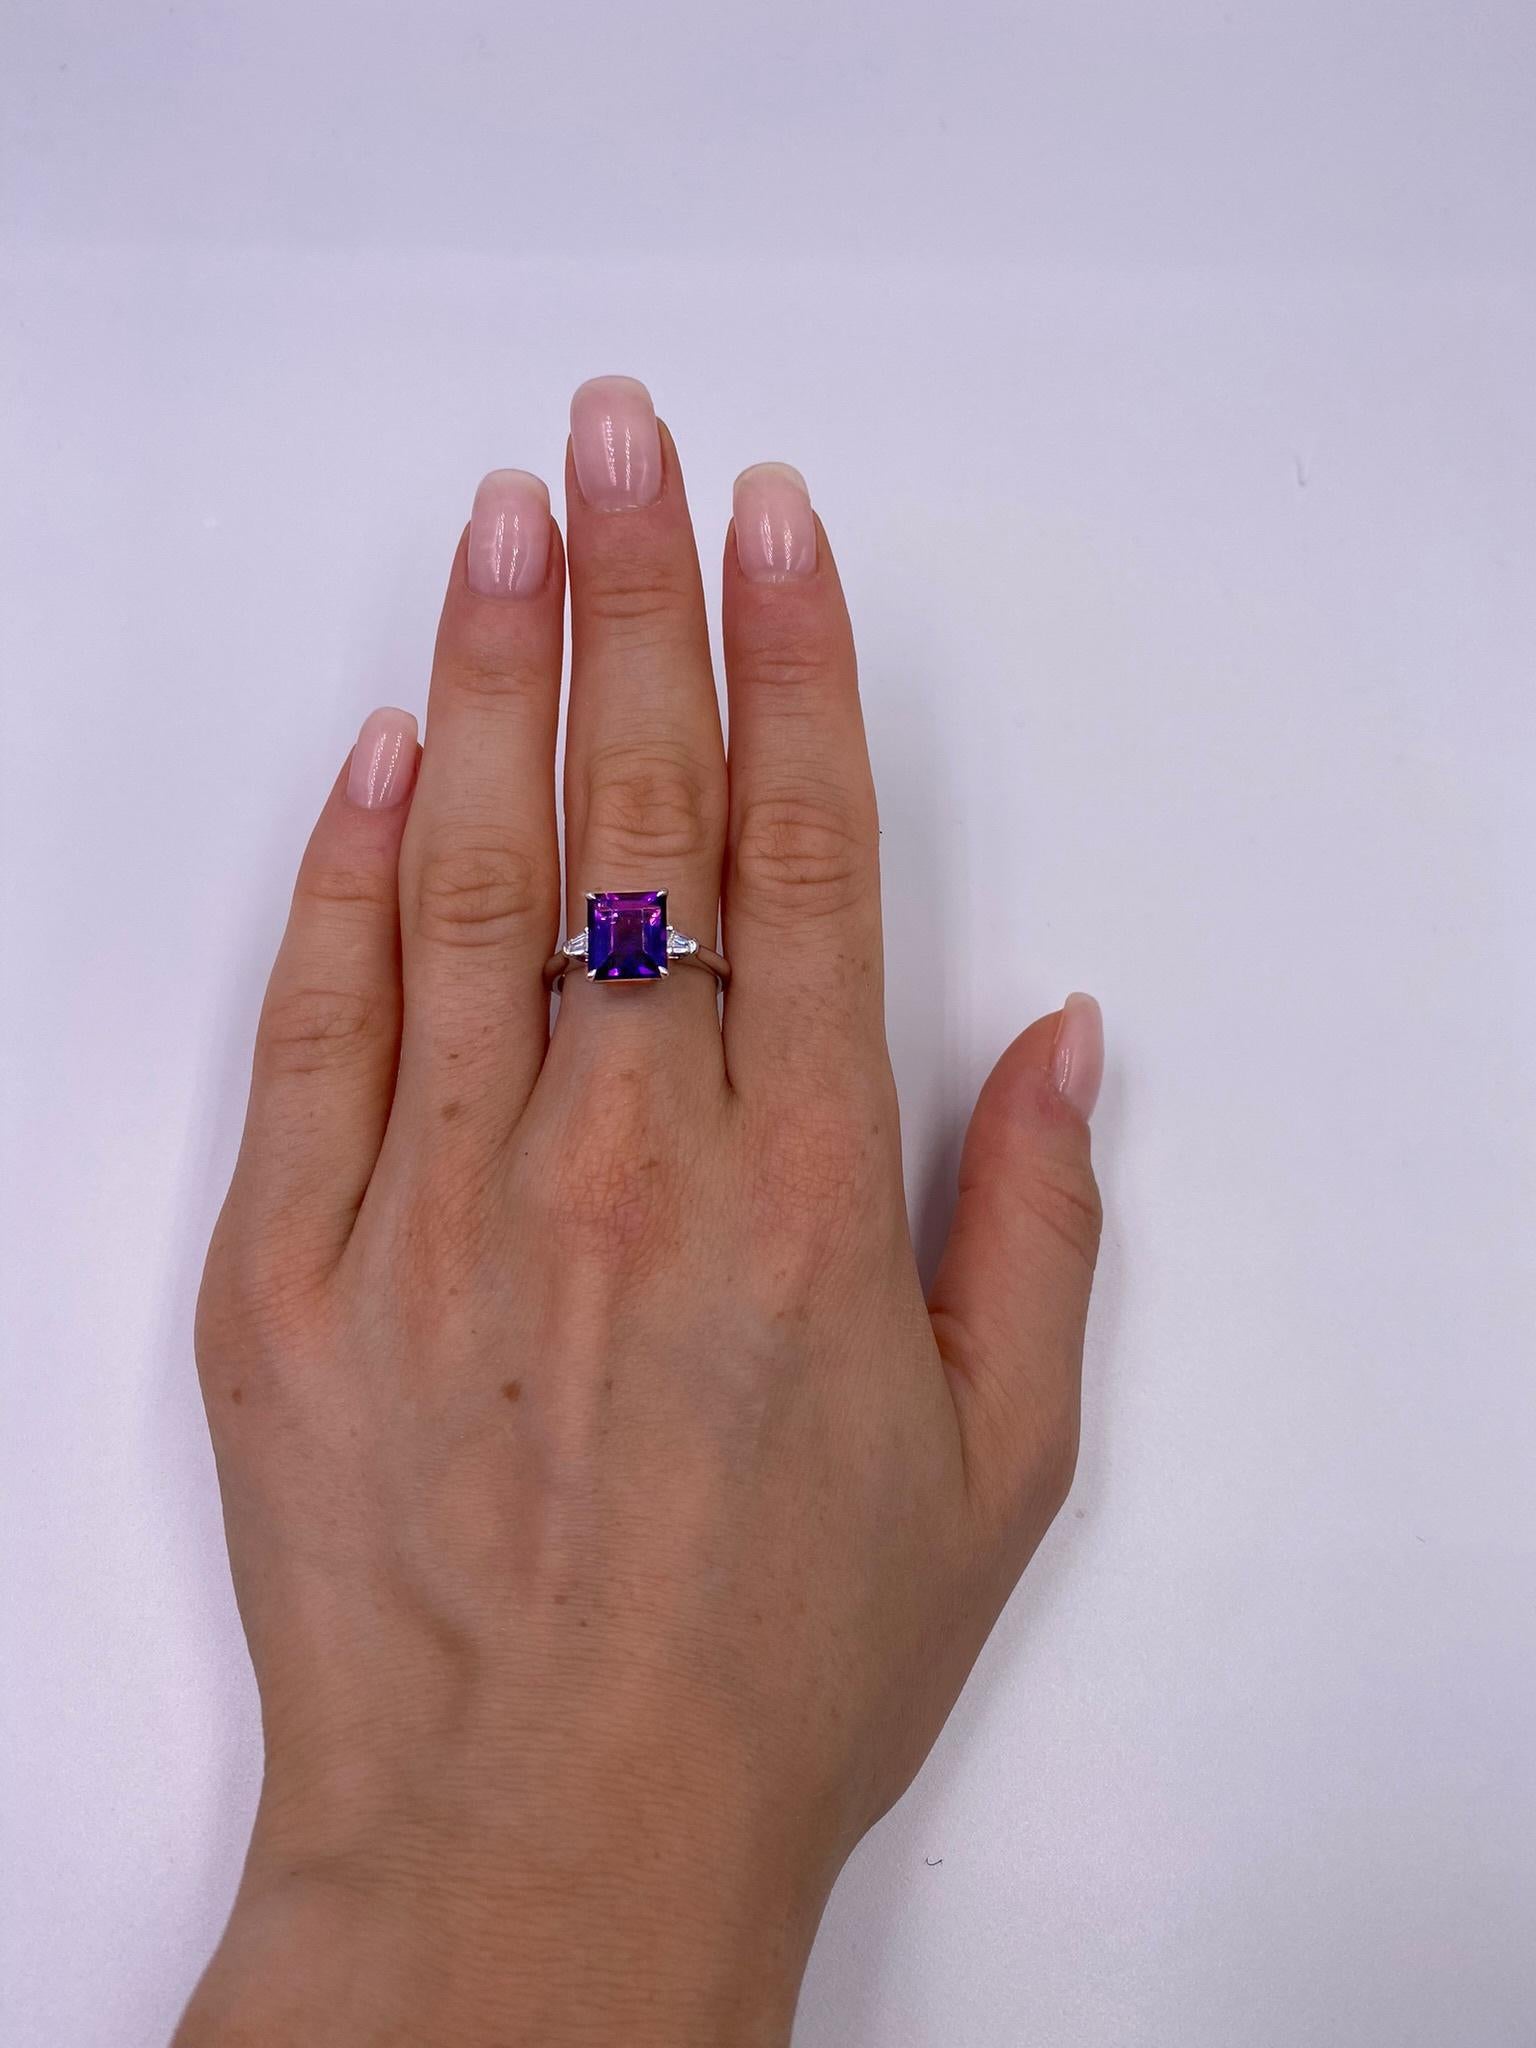 Square Cut 2.94 Ct Amethyst Diamond 18 K White Gold Ring For Sale